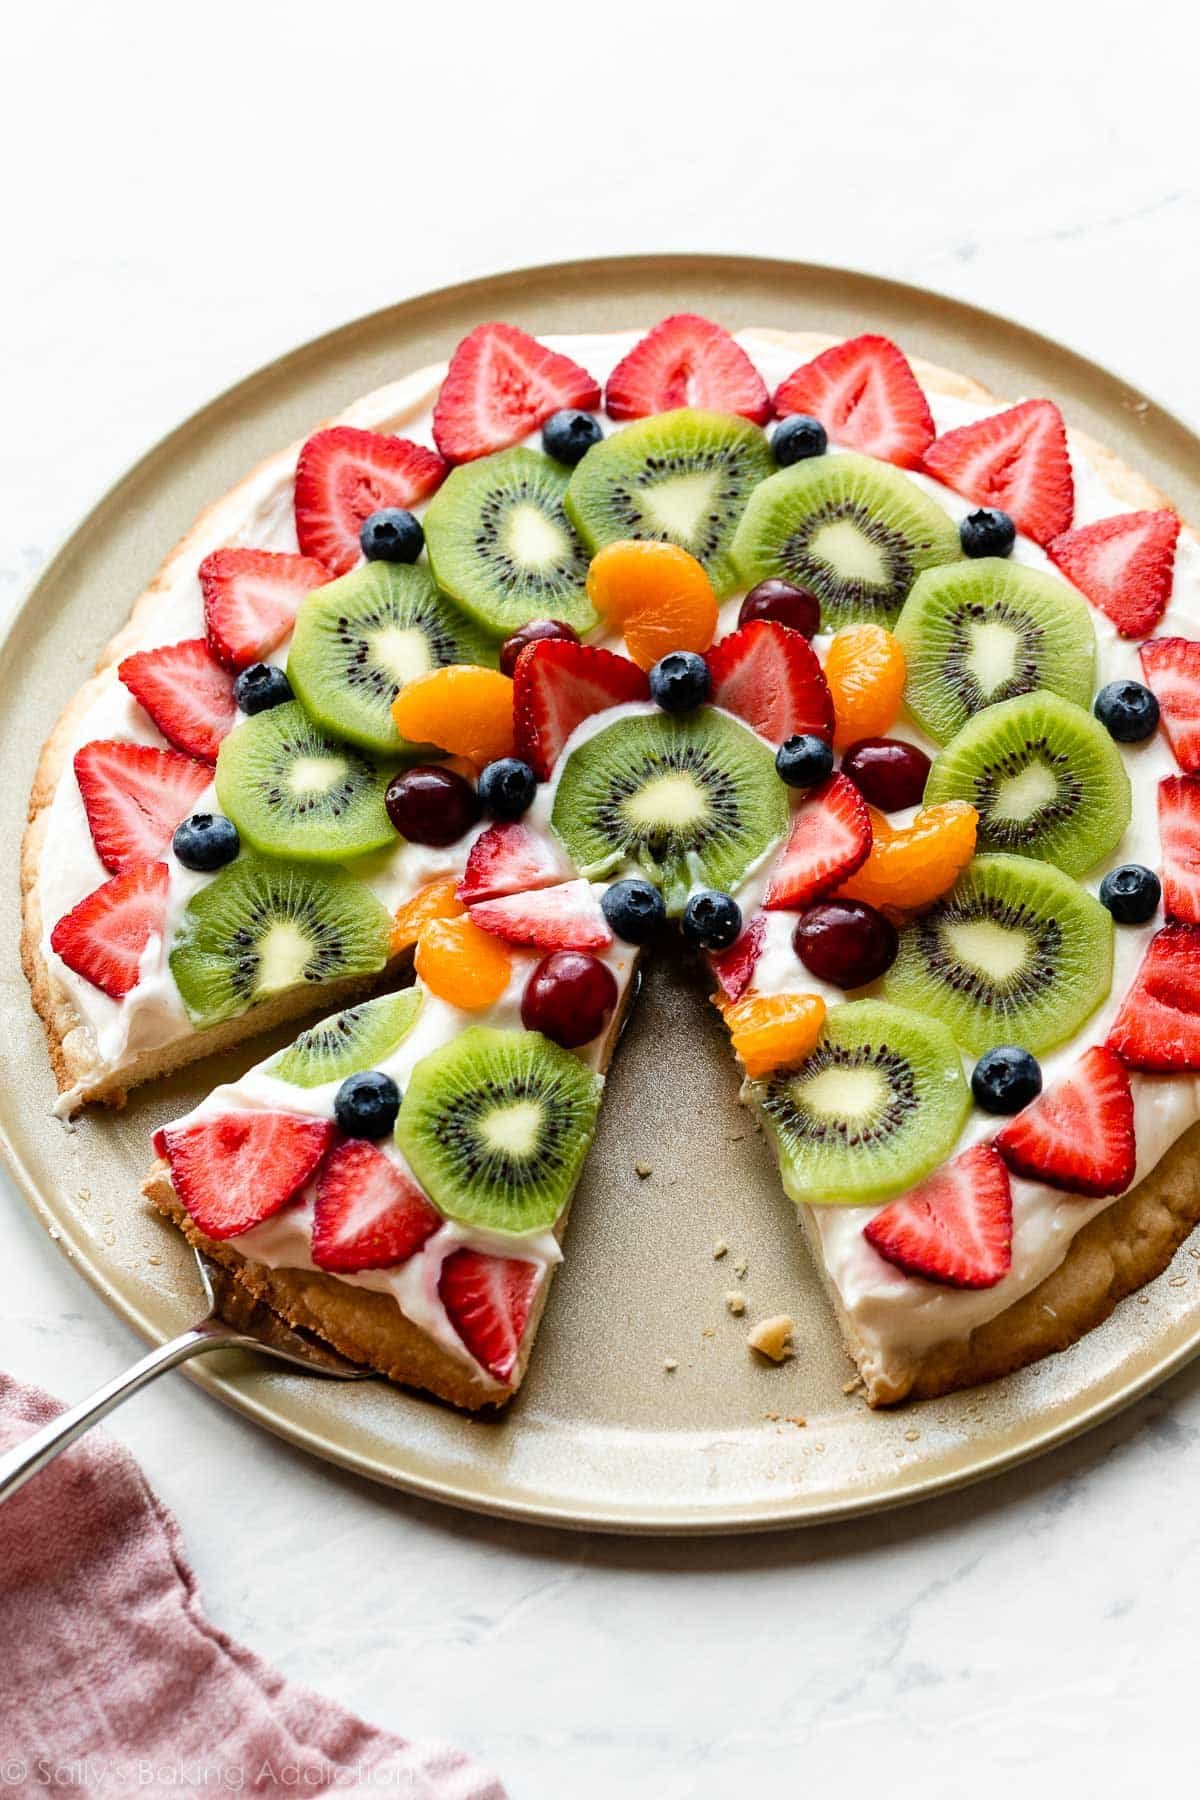 decorated sugar cookie fruit pizza on pizza pan with strawberries, kiwi, blueberries, grapes, and mandarin oranges on top.